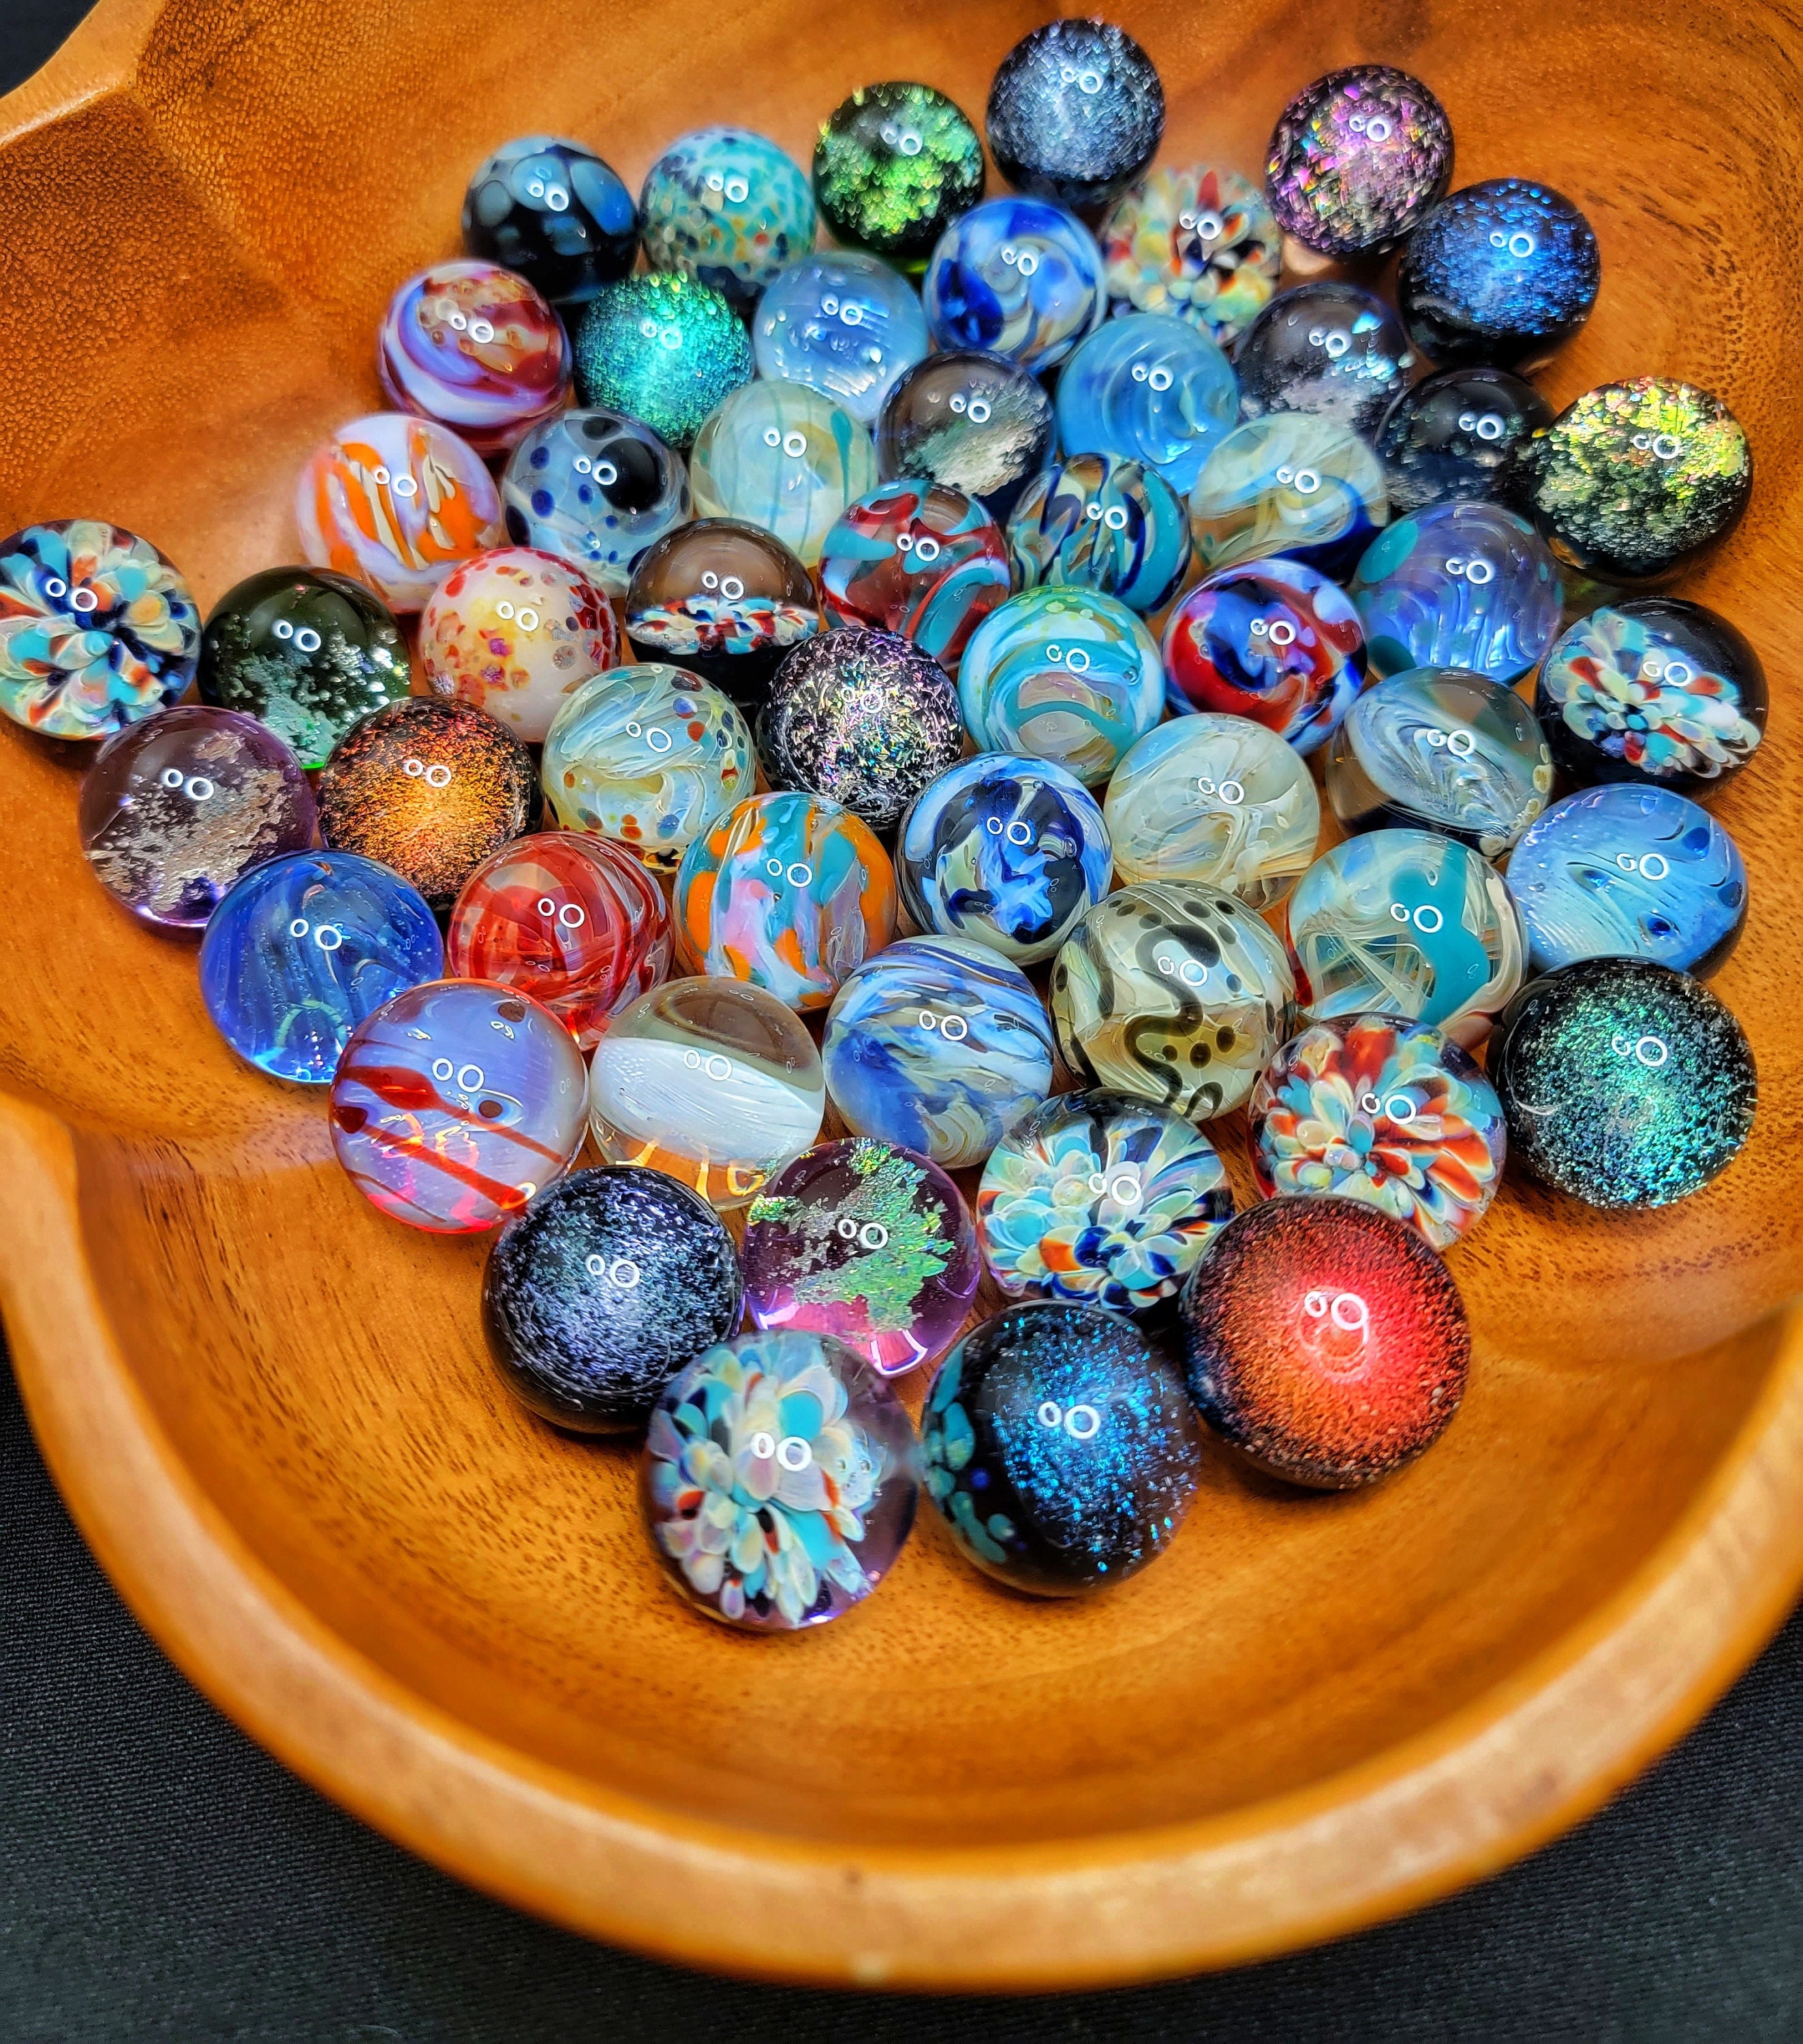 Glass Marbles For Topping Up - 3 lbs